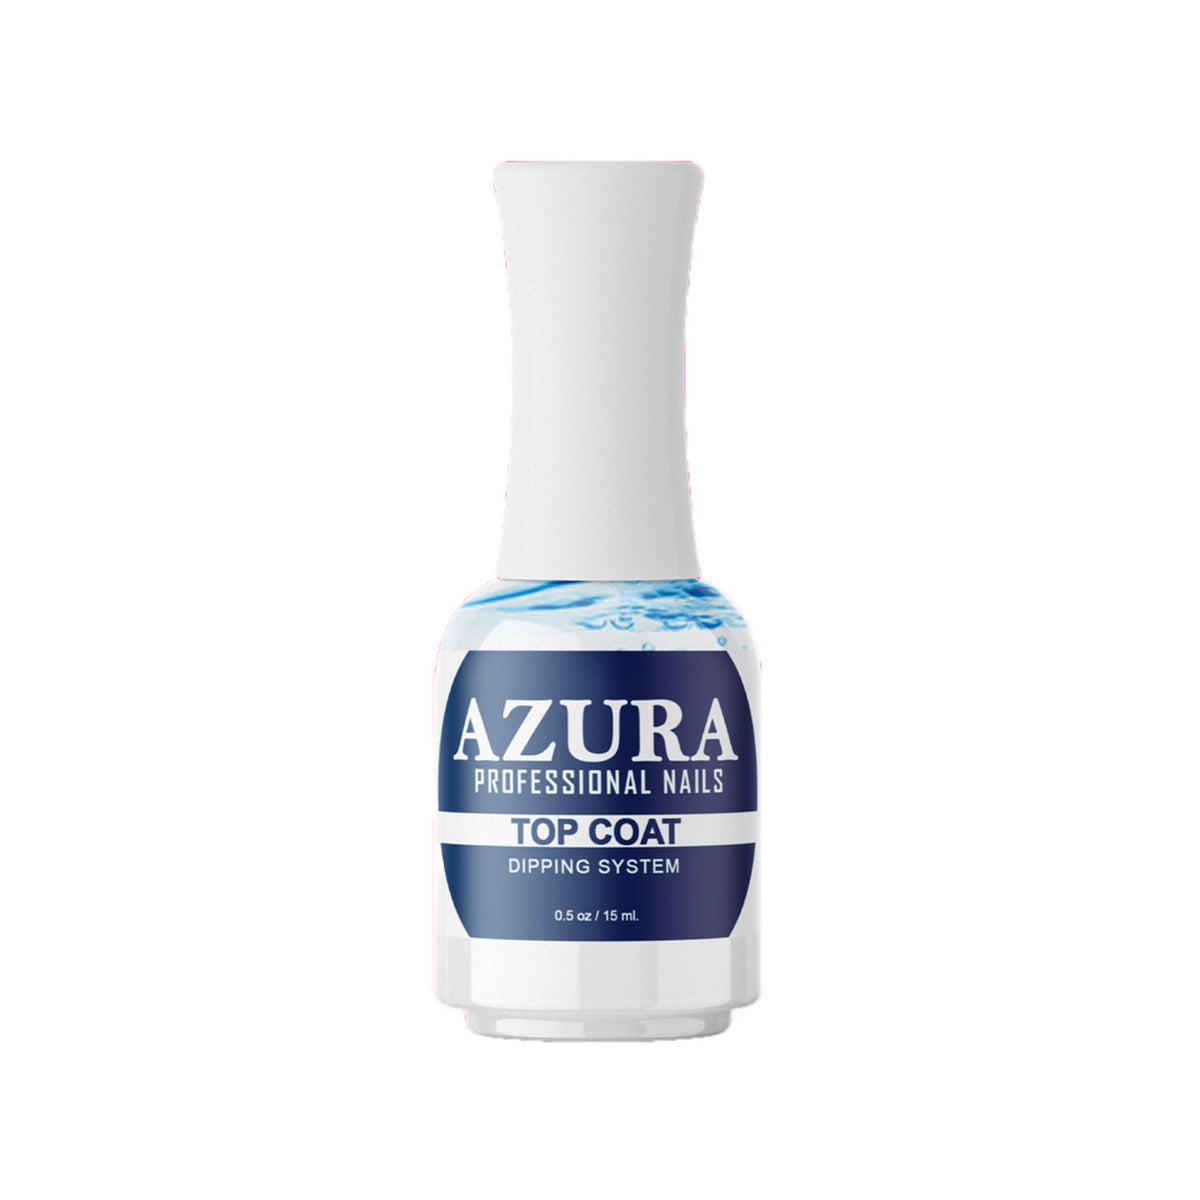 AZURA Dipping Essential - Top Dip (0.5oz/15ml) for Dipping Manicures-AZURA- Nail Supply American Gel Polish - Phuong Ni